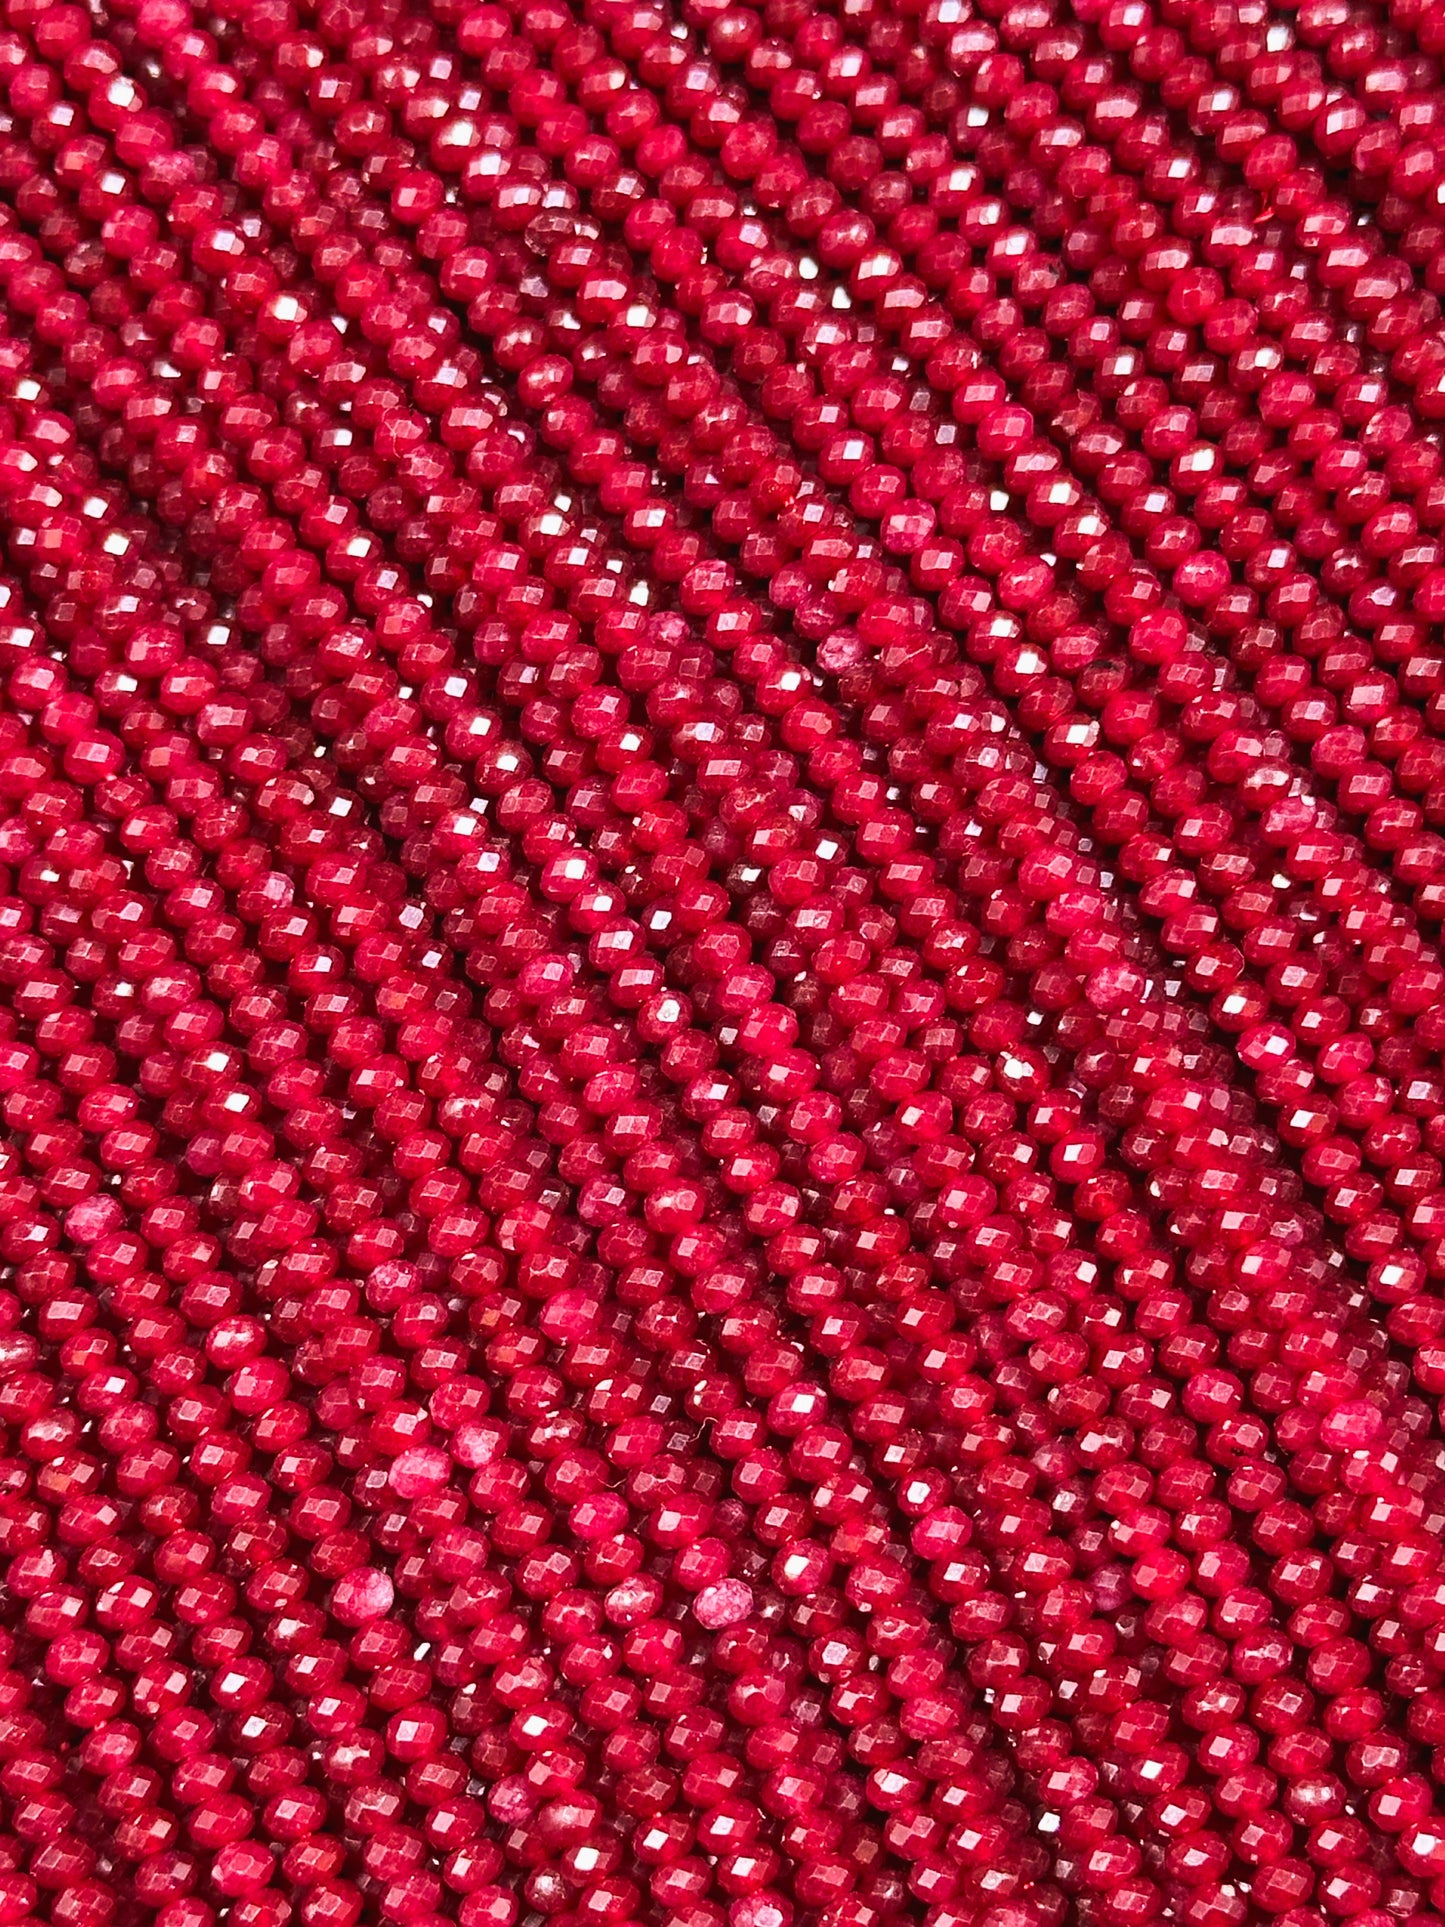 Natural Red Jade Gemstone Bead Faceted 3mm Bead, Gorgeous Natural Red Color Jade Bead Excellent Quality Full Strand 15.5"